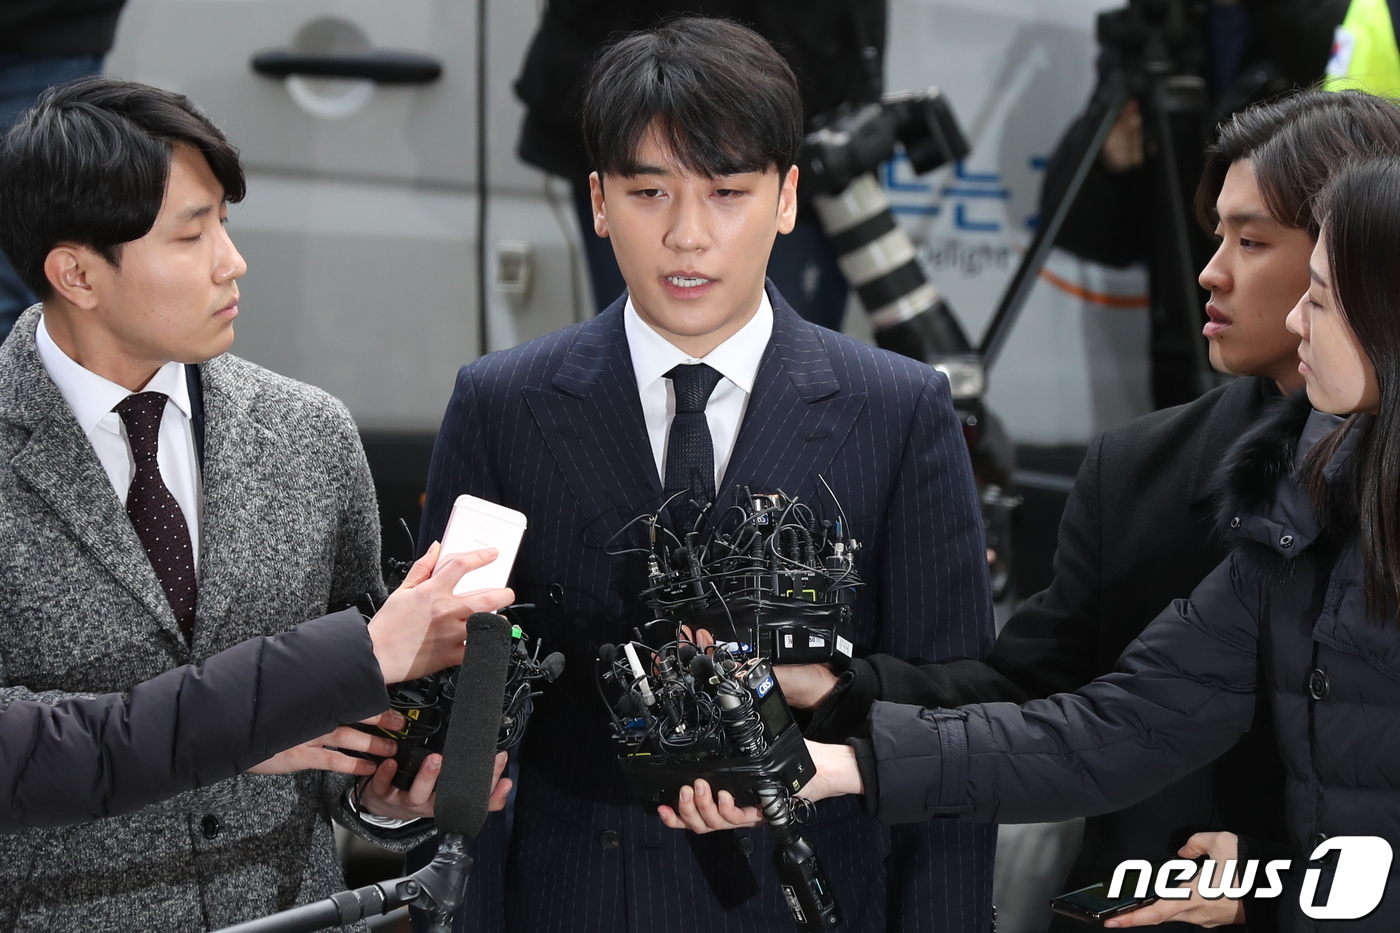 Seungri Reportedly Refusing To Hand Over His Phone For Investigation